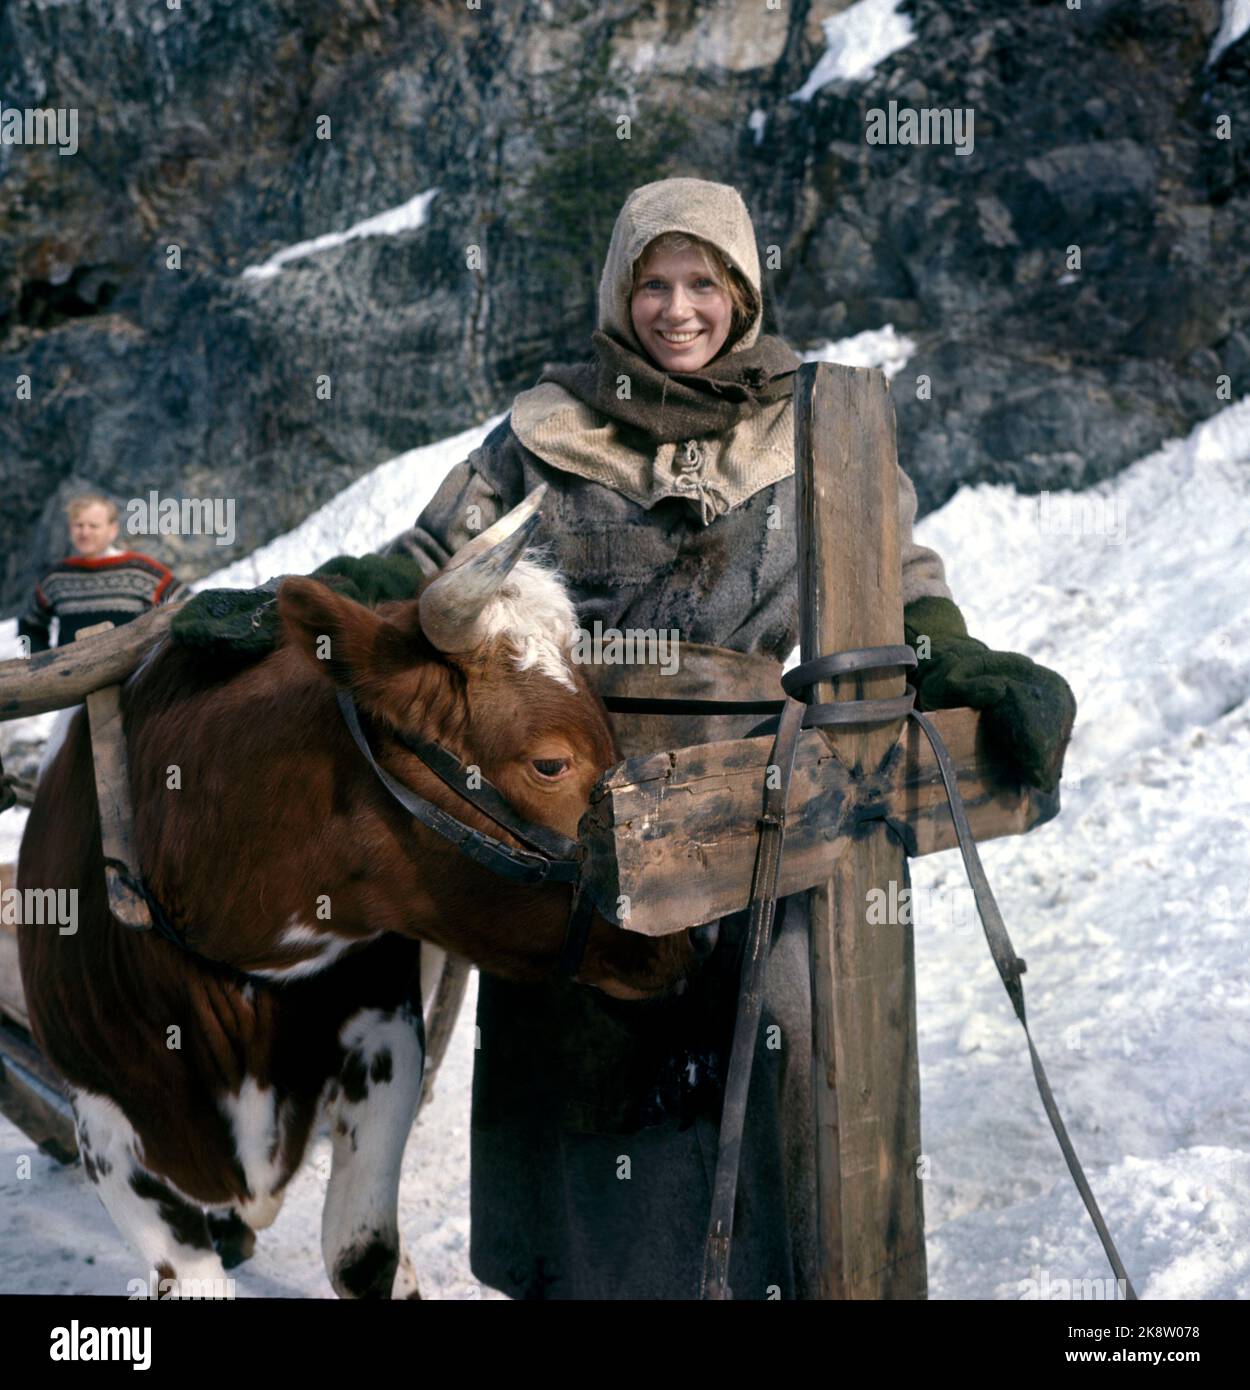 Røros March 1968. Liv Ullmann during recording the movie 'An-Magritt' after Johan Falkberget's 'Night Bread' at Røros. Arne Skouen is a director, and Liv Ullmann plays the title role. Photo Erik Thorberg / NTB / NTB Stock Photo